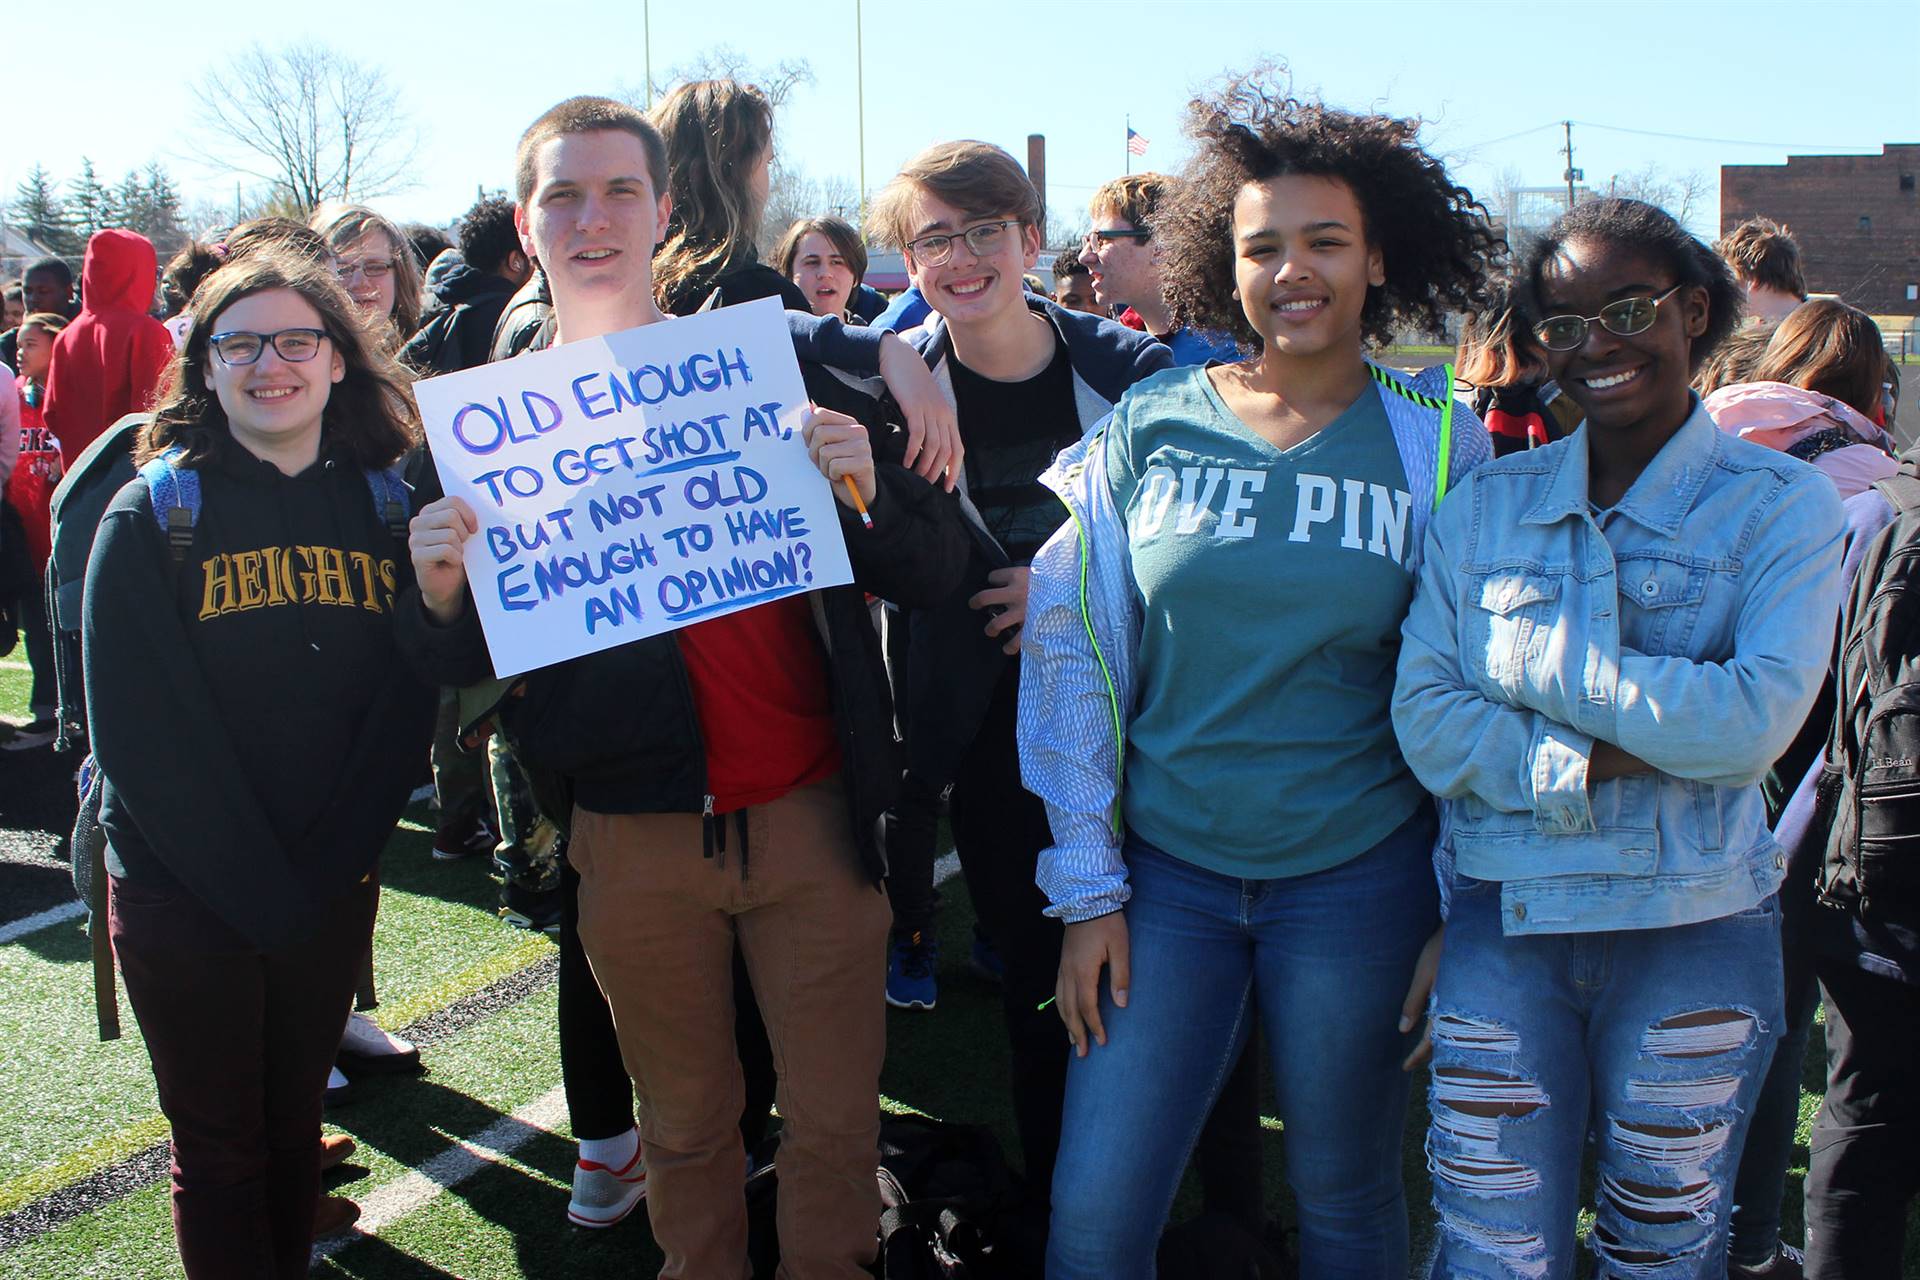 Heights High students with signs